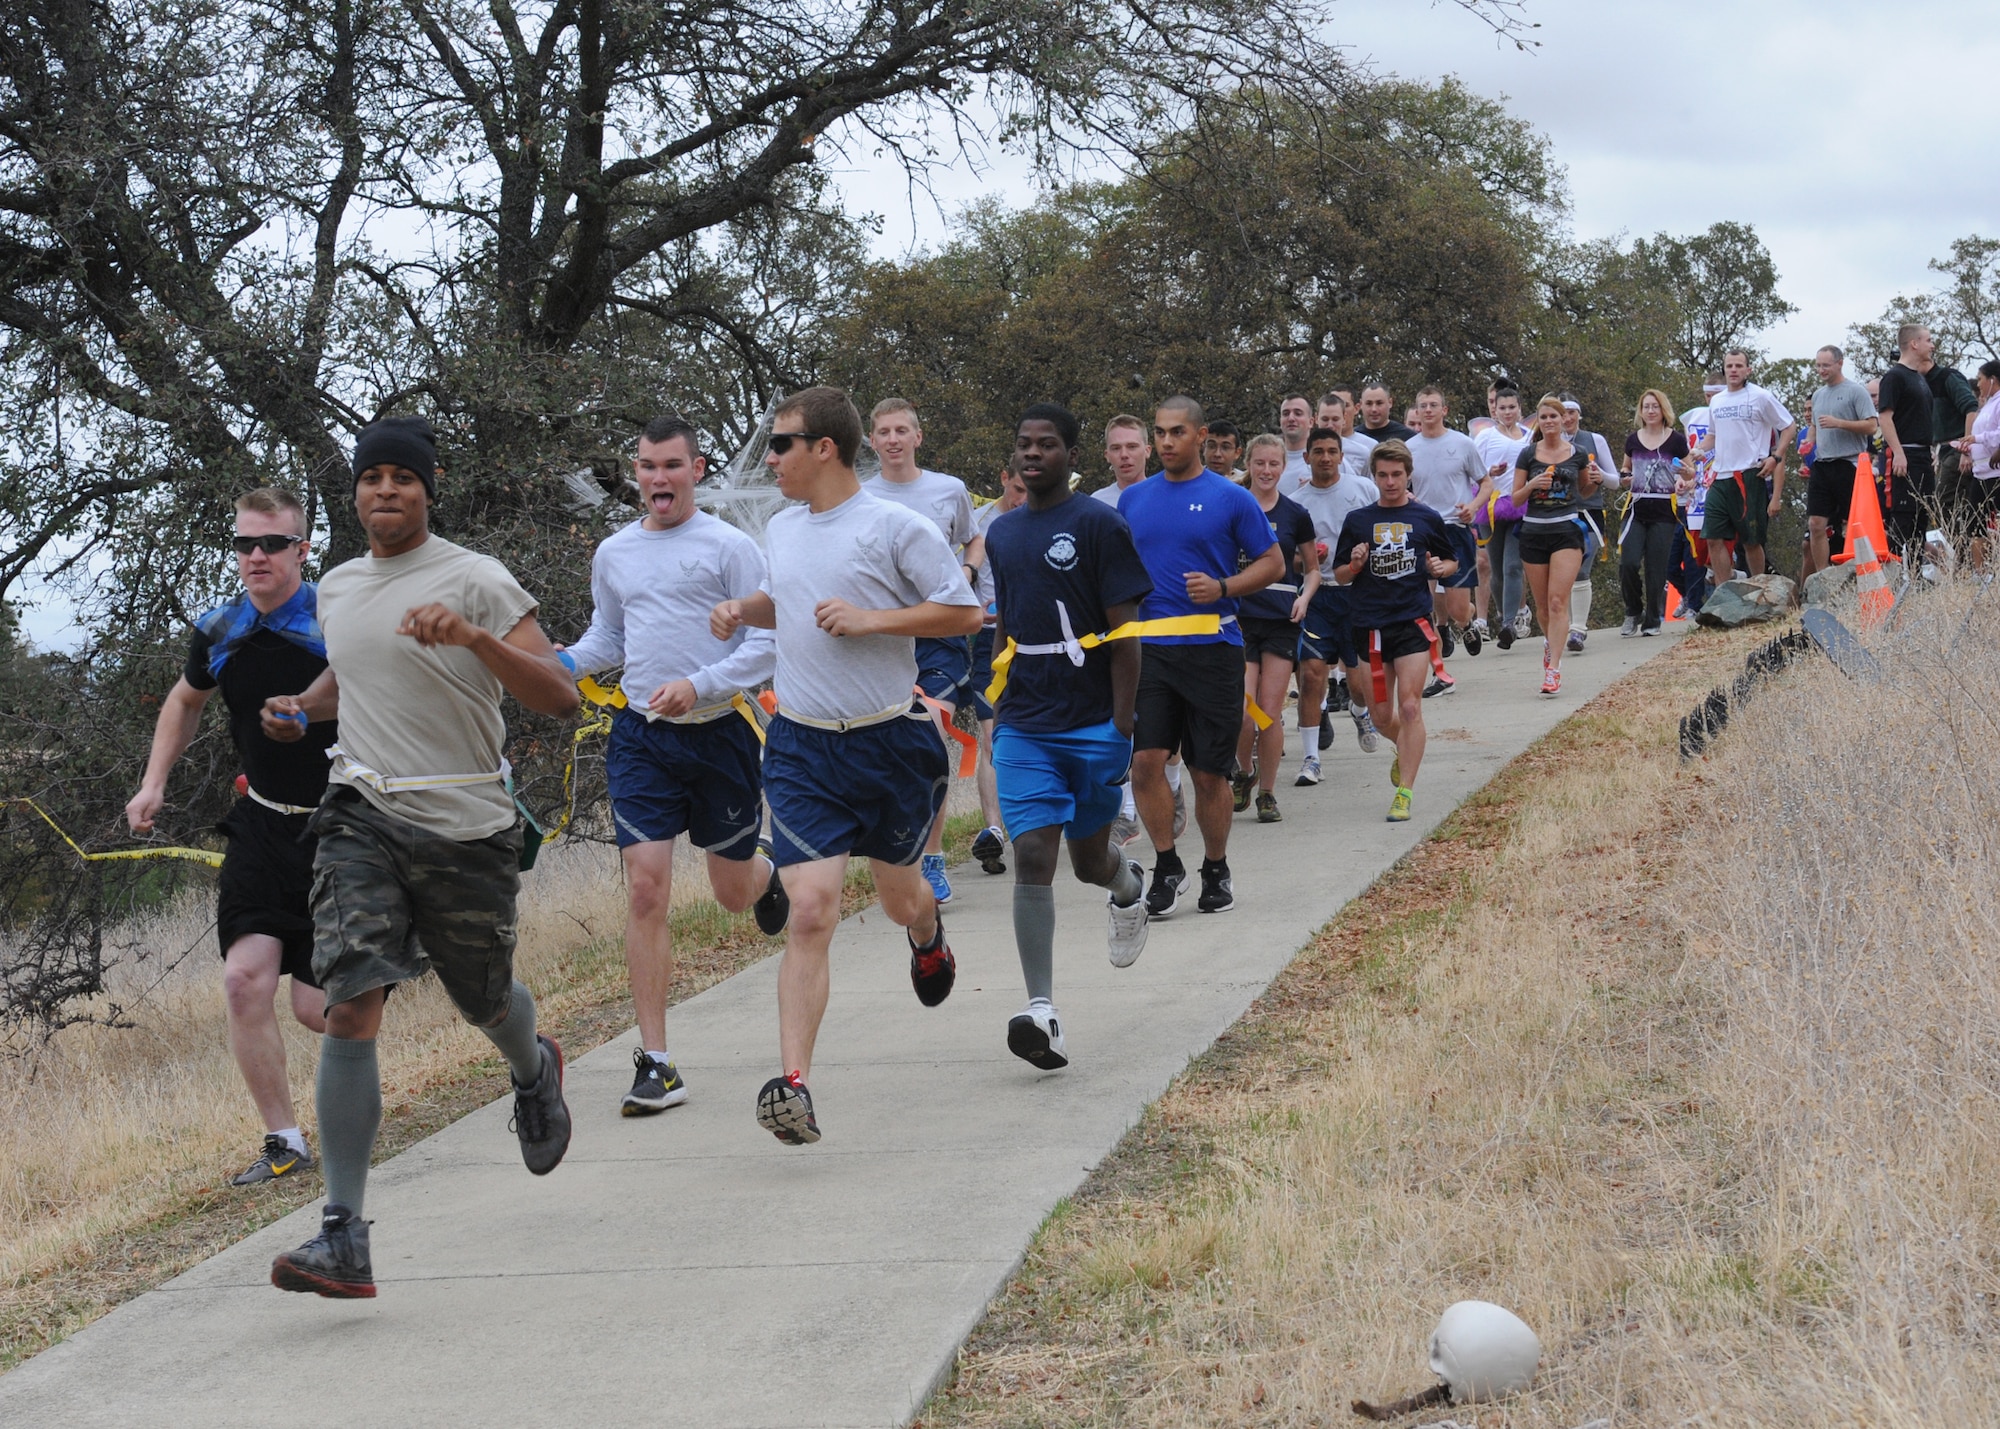 Members of Team Beale participate in the annual Zombie Run at Beale Air Force Base Calif., Oct. 31, 2012. The runners had to complete the 2.6 mile zombie-infested wooded course behind housing without losing their flags. (U.S. Air Force photo by 2nd Lt. Siobhan Bennett)